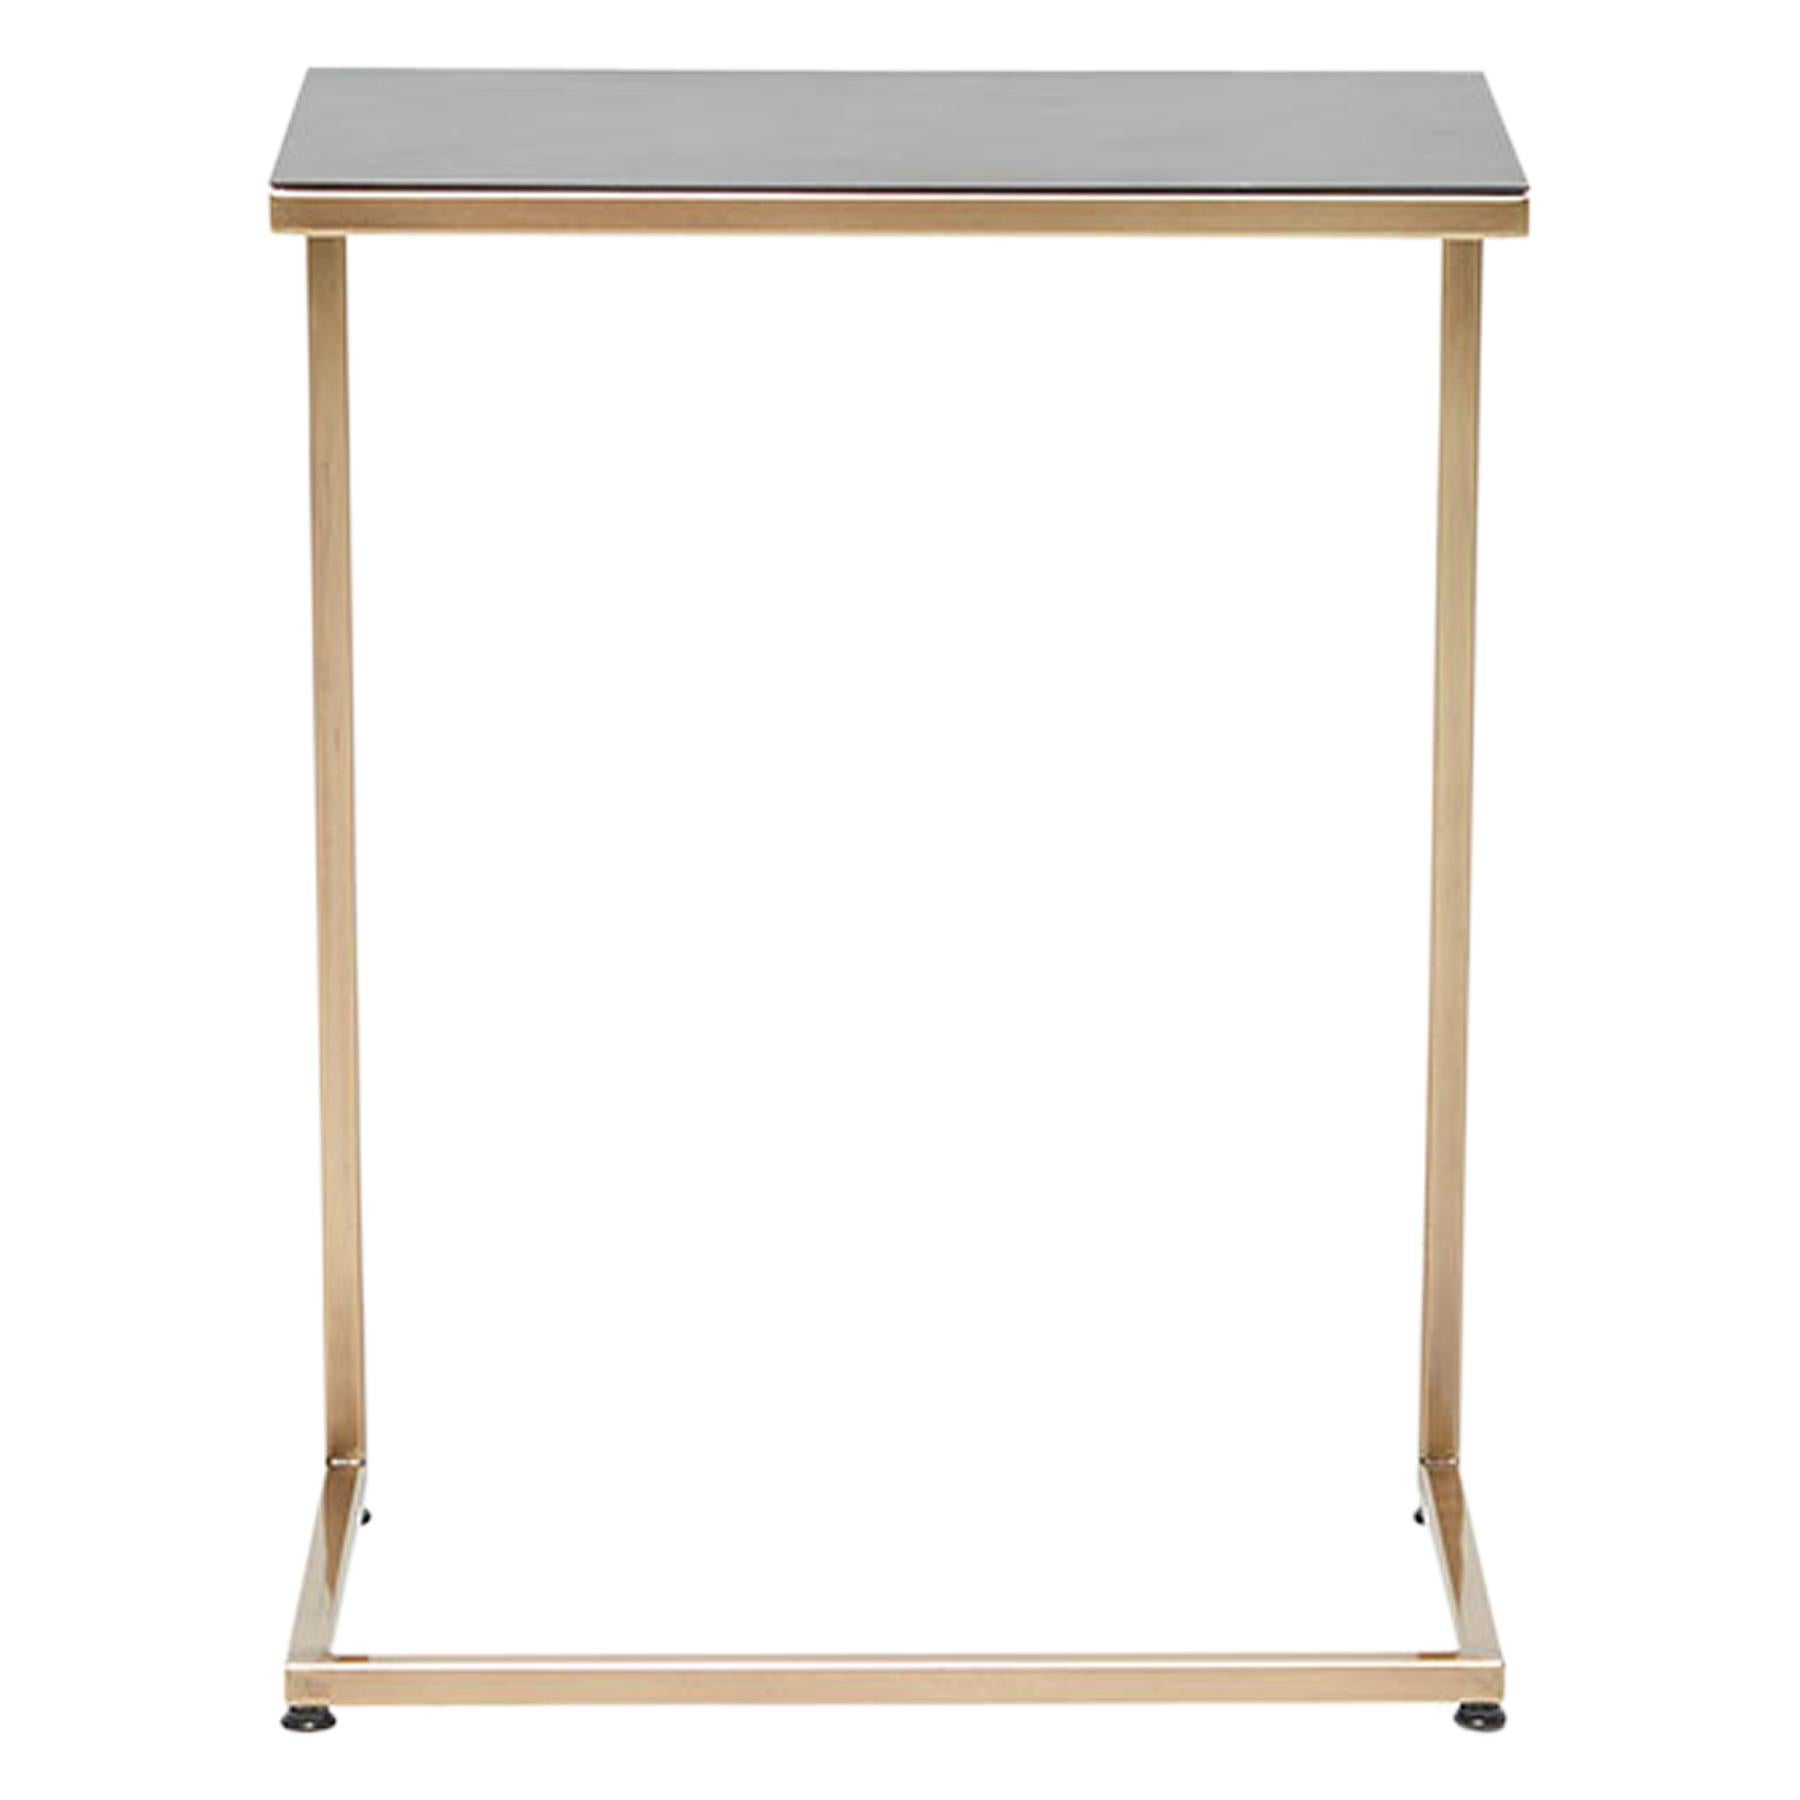 Side Table with Antique Brass Frame and Blackened Steel Top